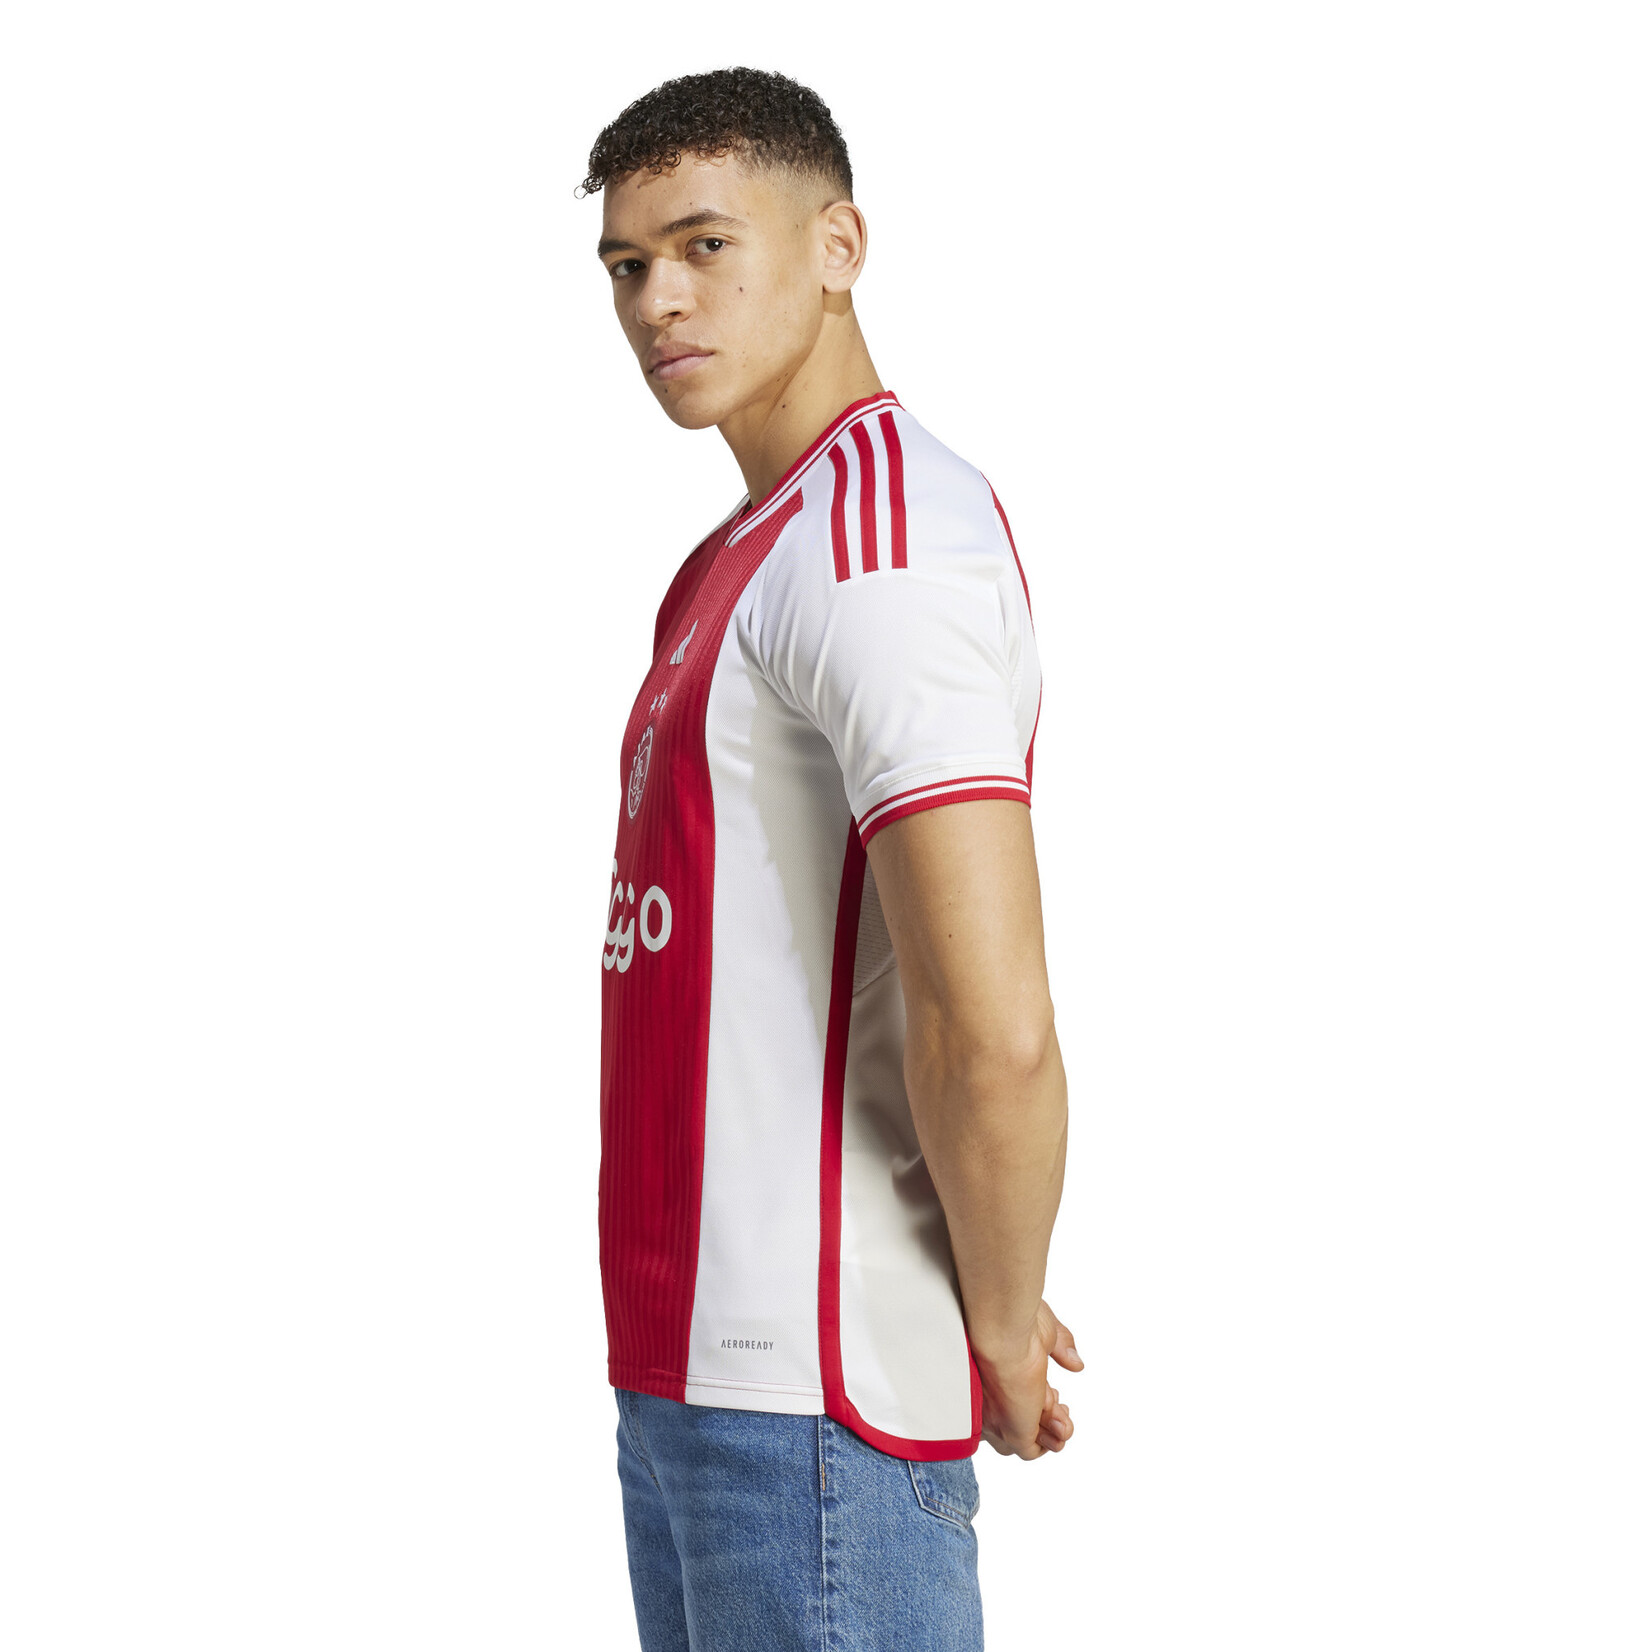 ADIDAS AJAX AMSTERDAM 23/24 HOME JERSEY (RED/WHITE)